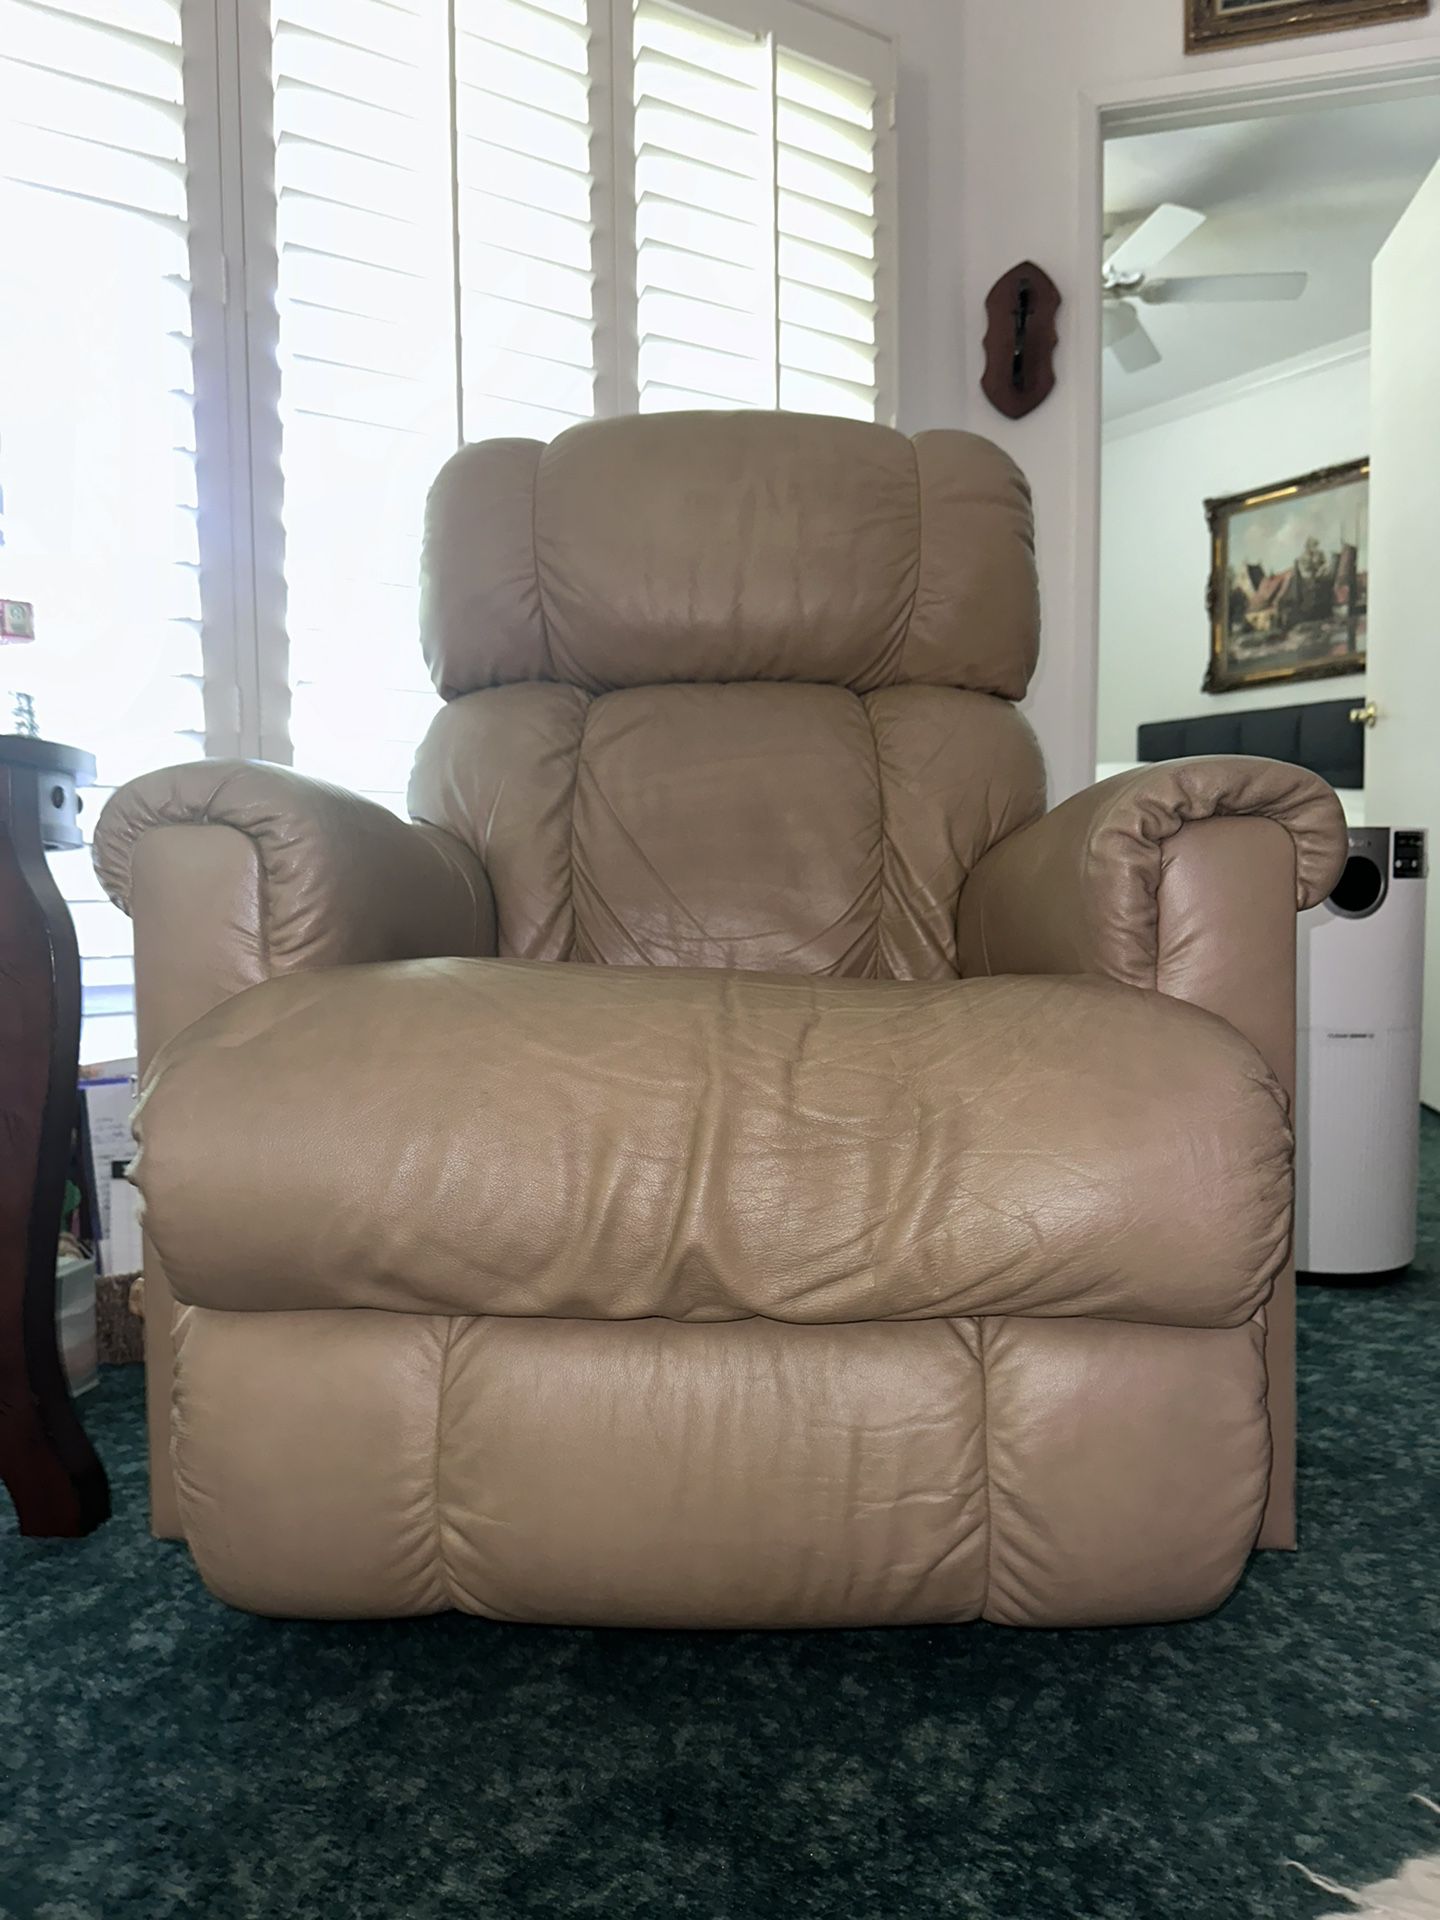 Recliner Lazy Boy Chairs (2)